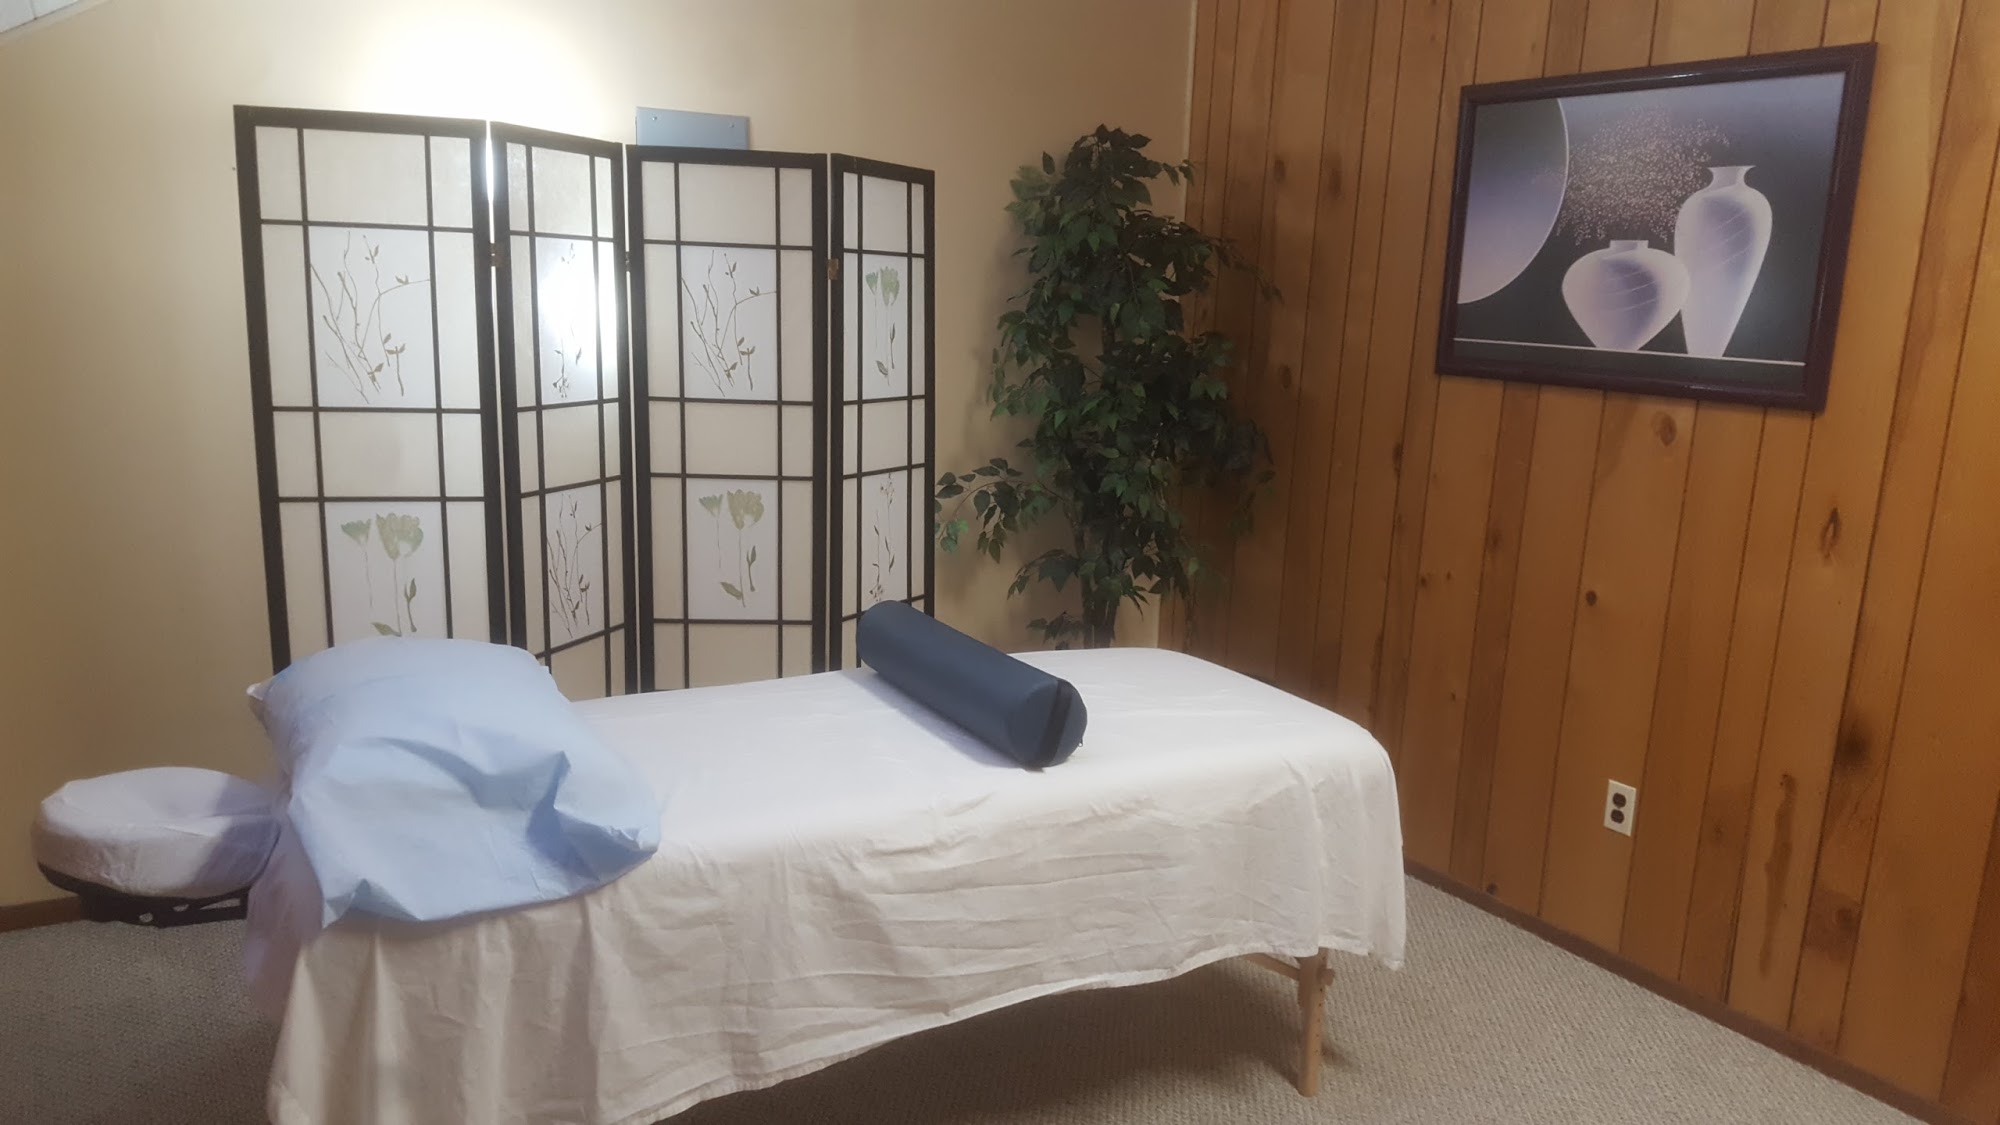 New City Acupuncture & Wellness Center